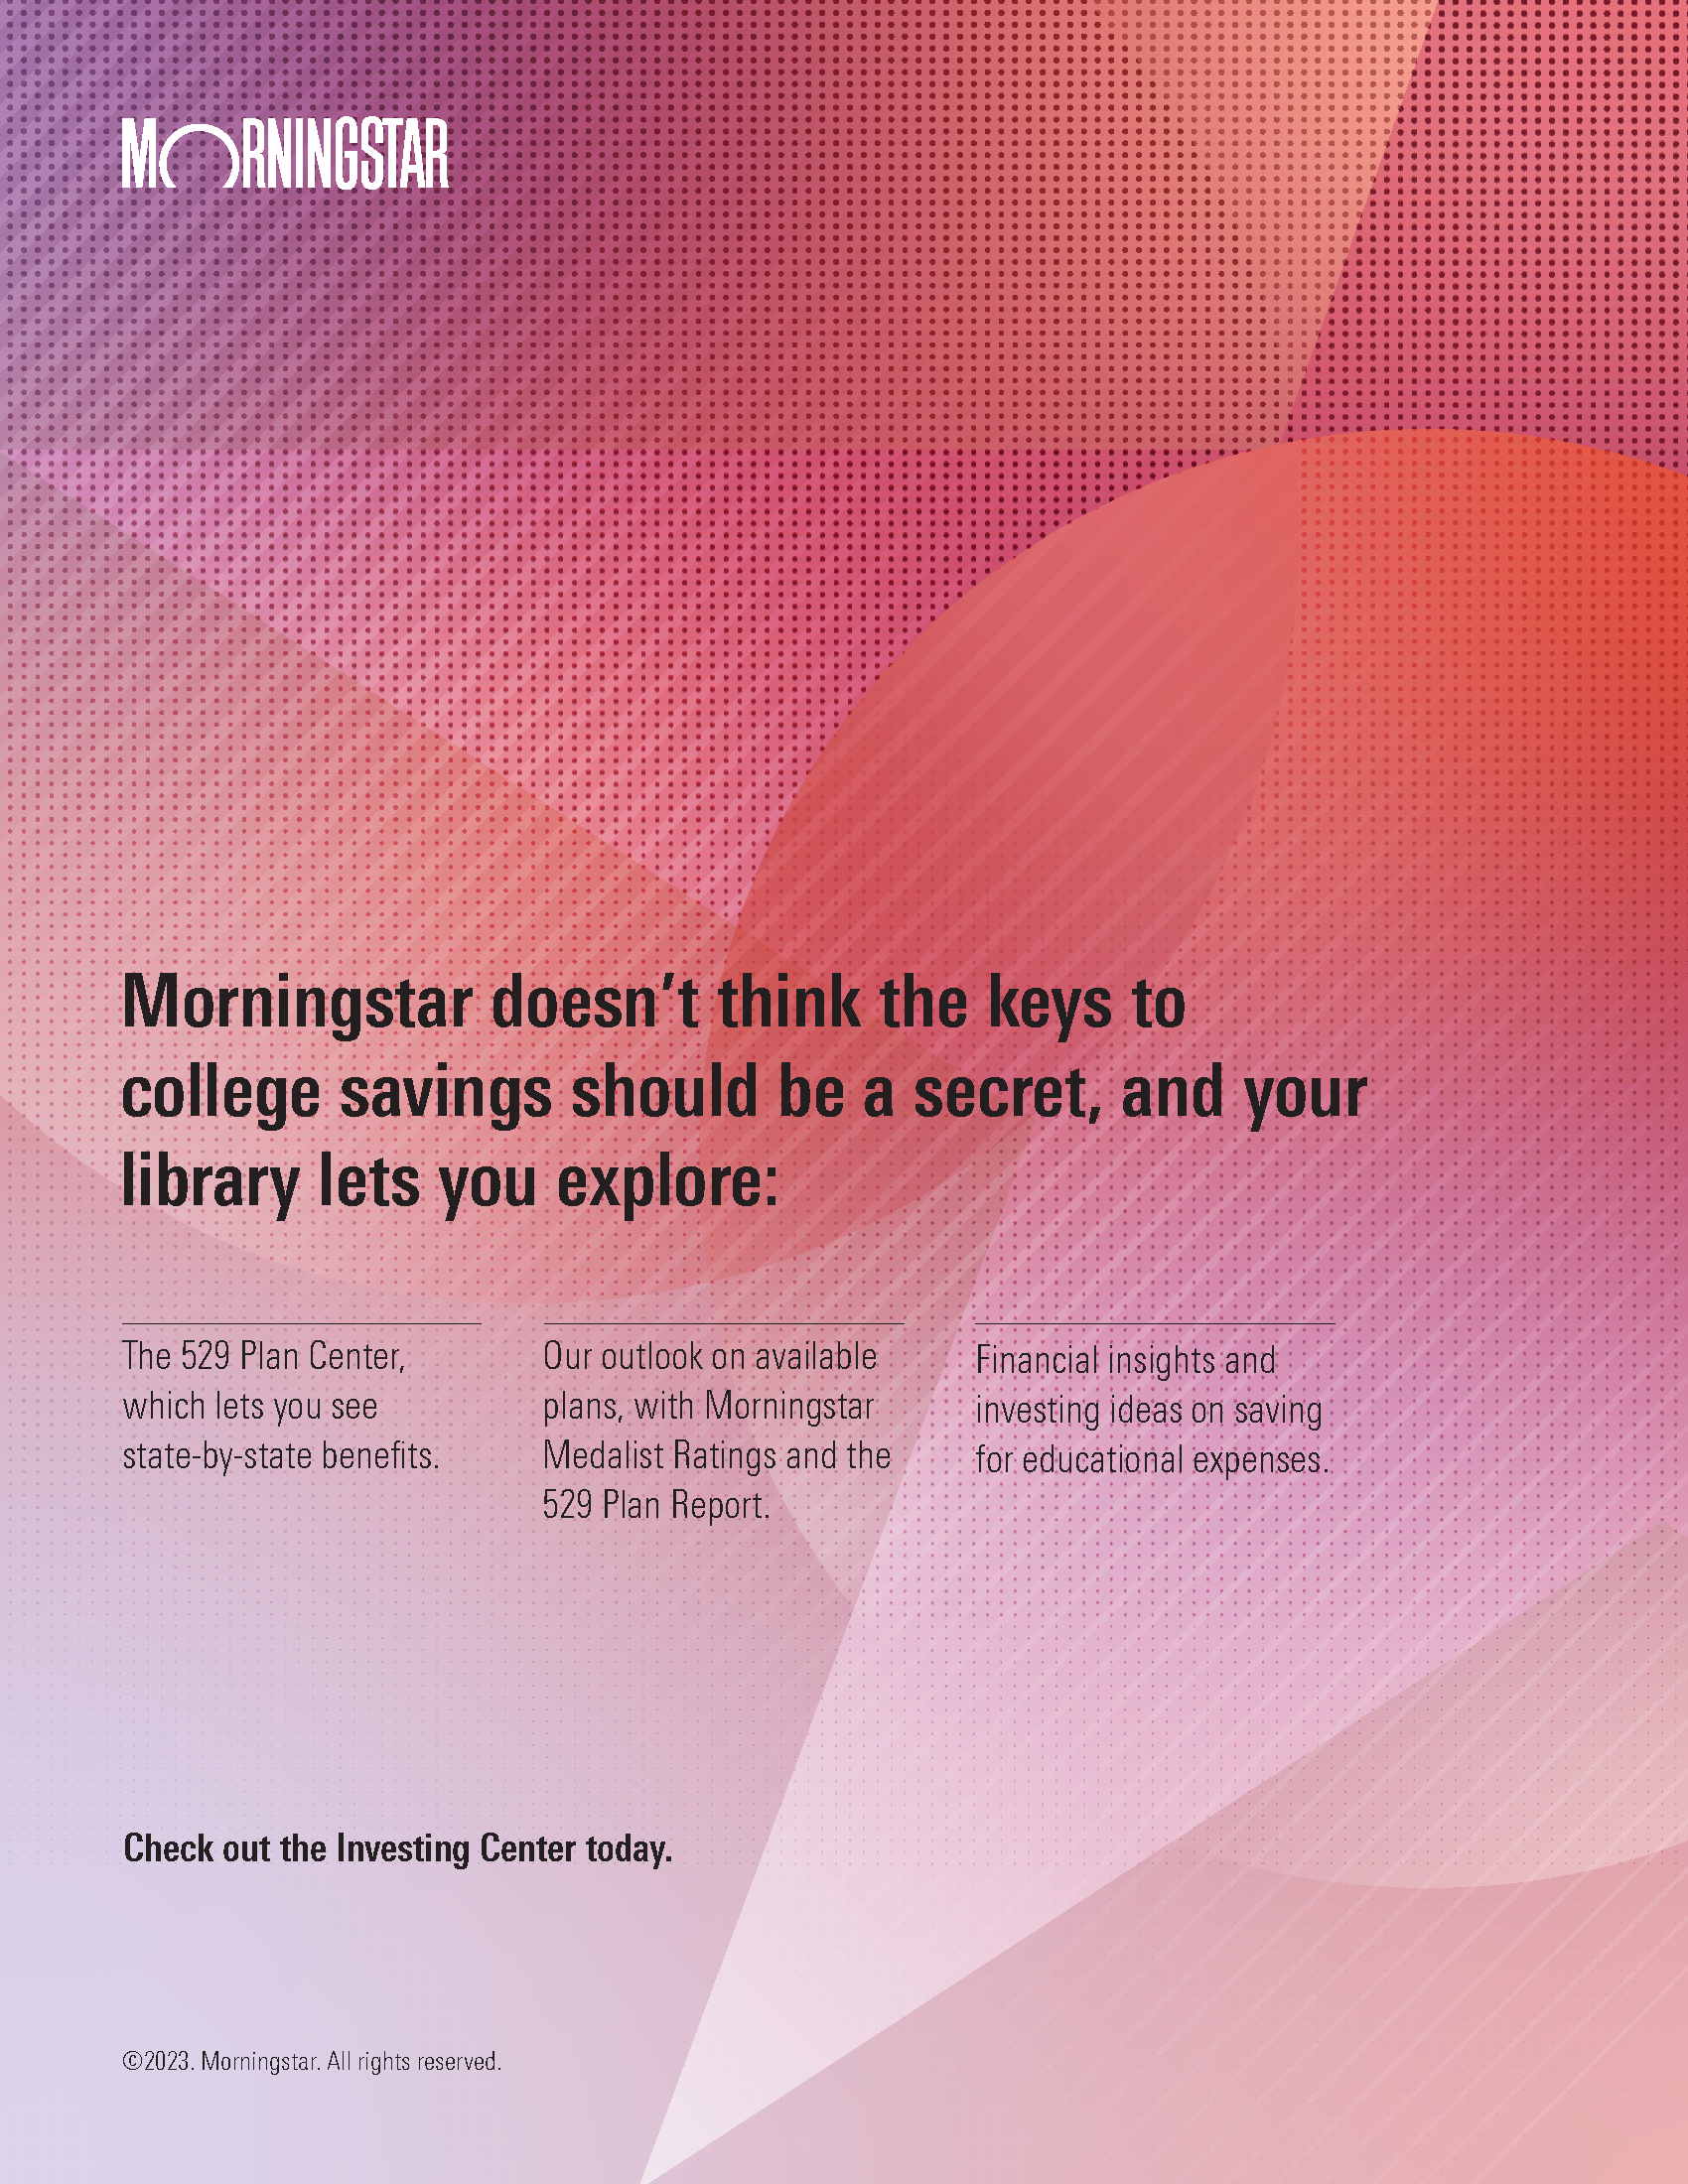 A red and purple abstract background with text about Morningstar.